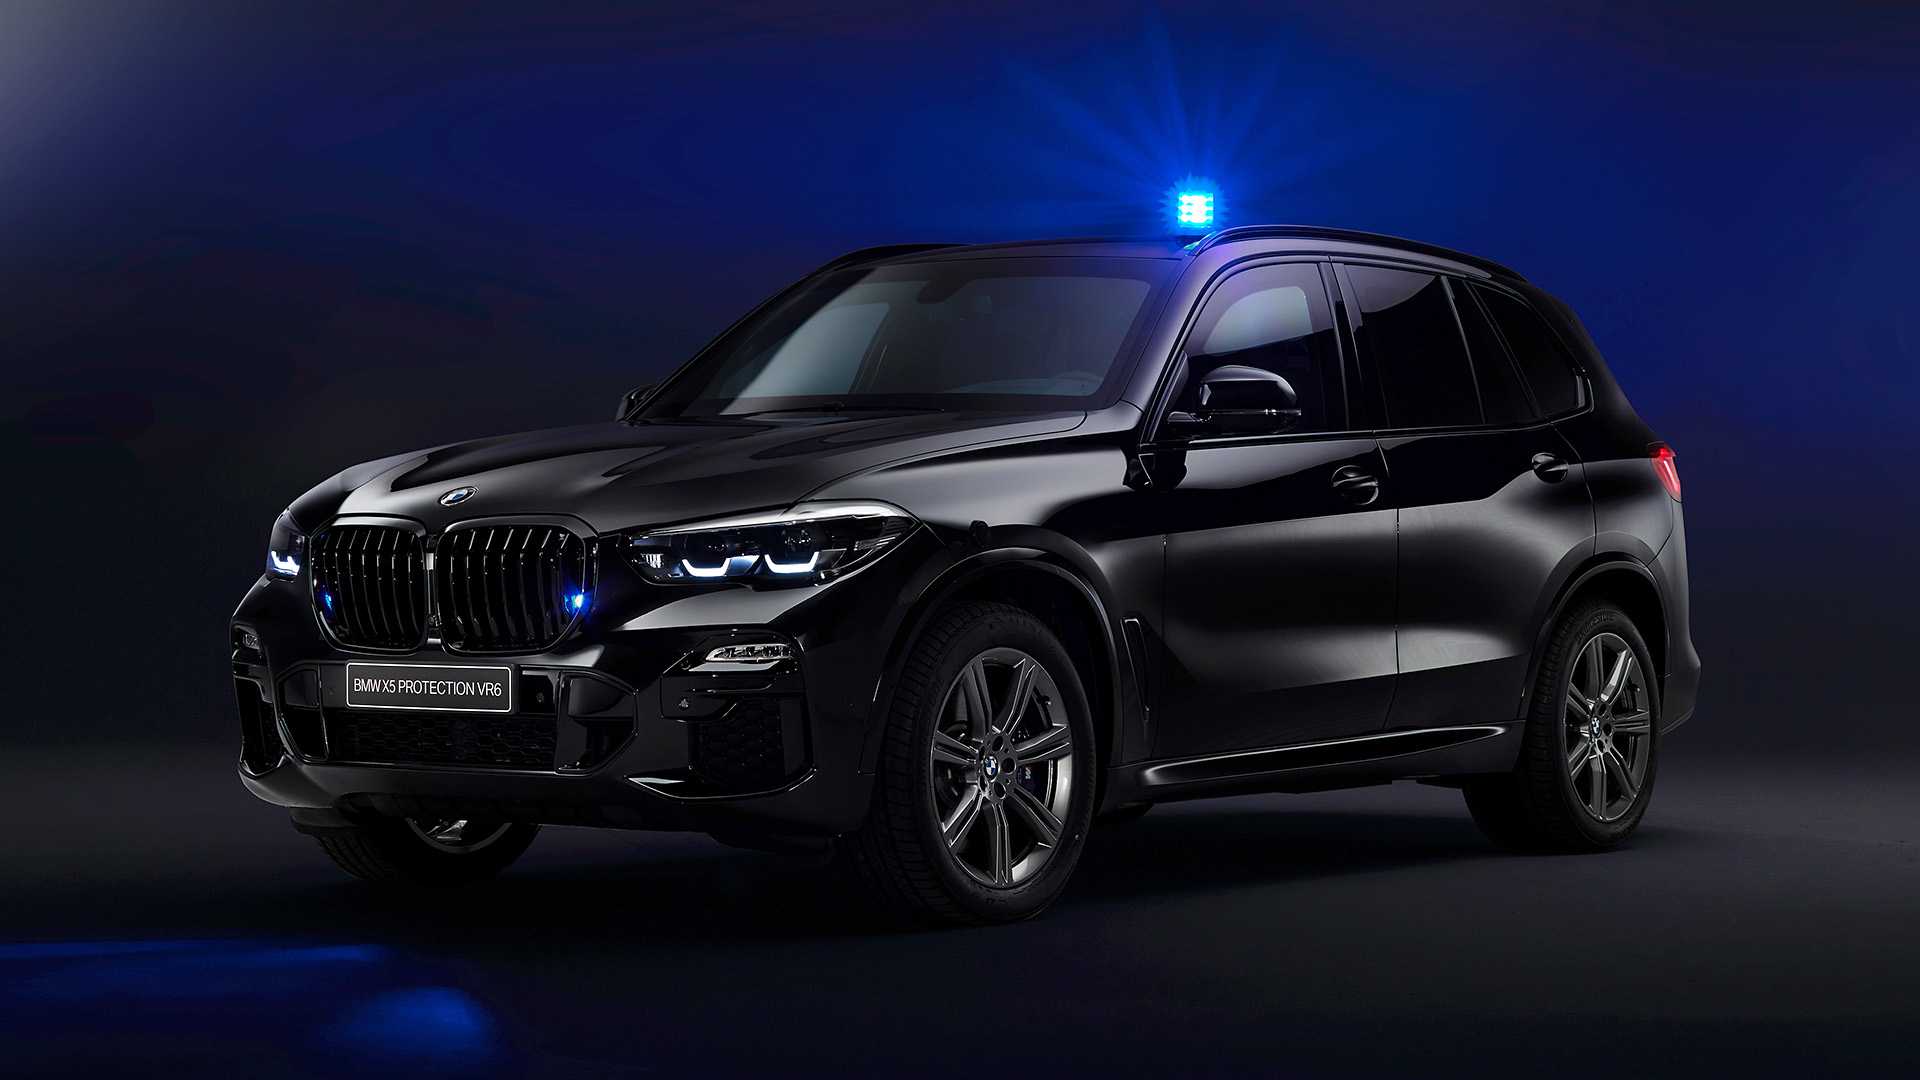 2020 BMW X5 Protection VR6 (Armored Vehicle) Front Three-Quarter Wallpapers #11 of 25